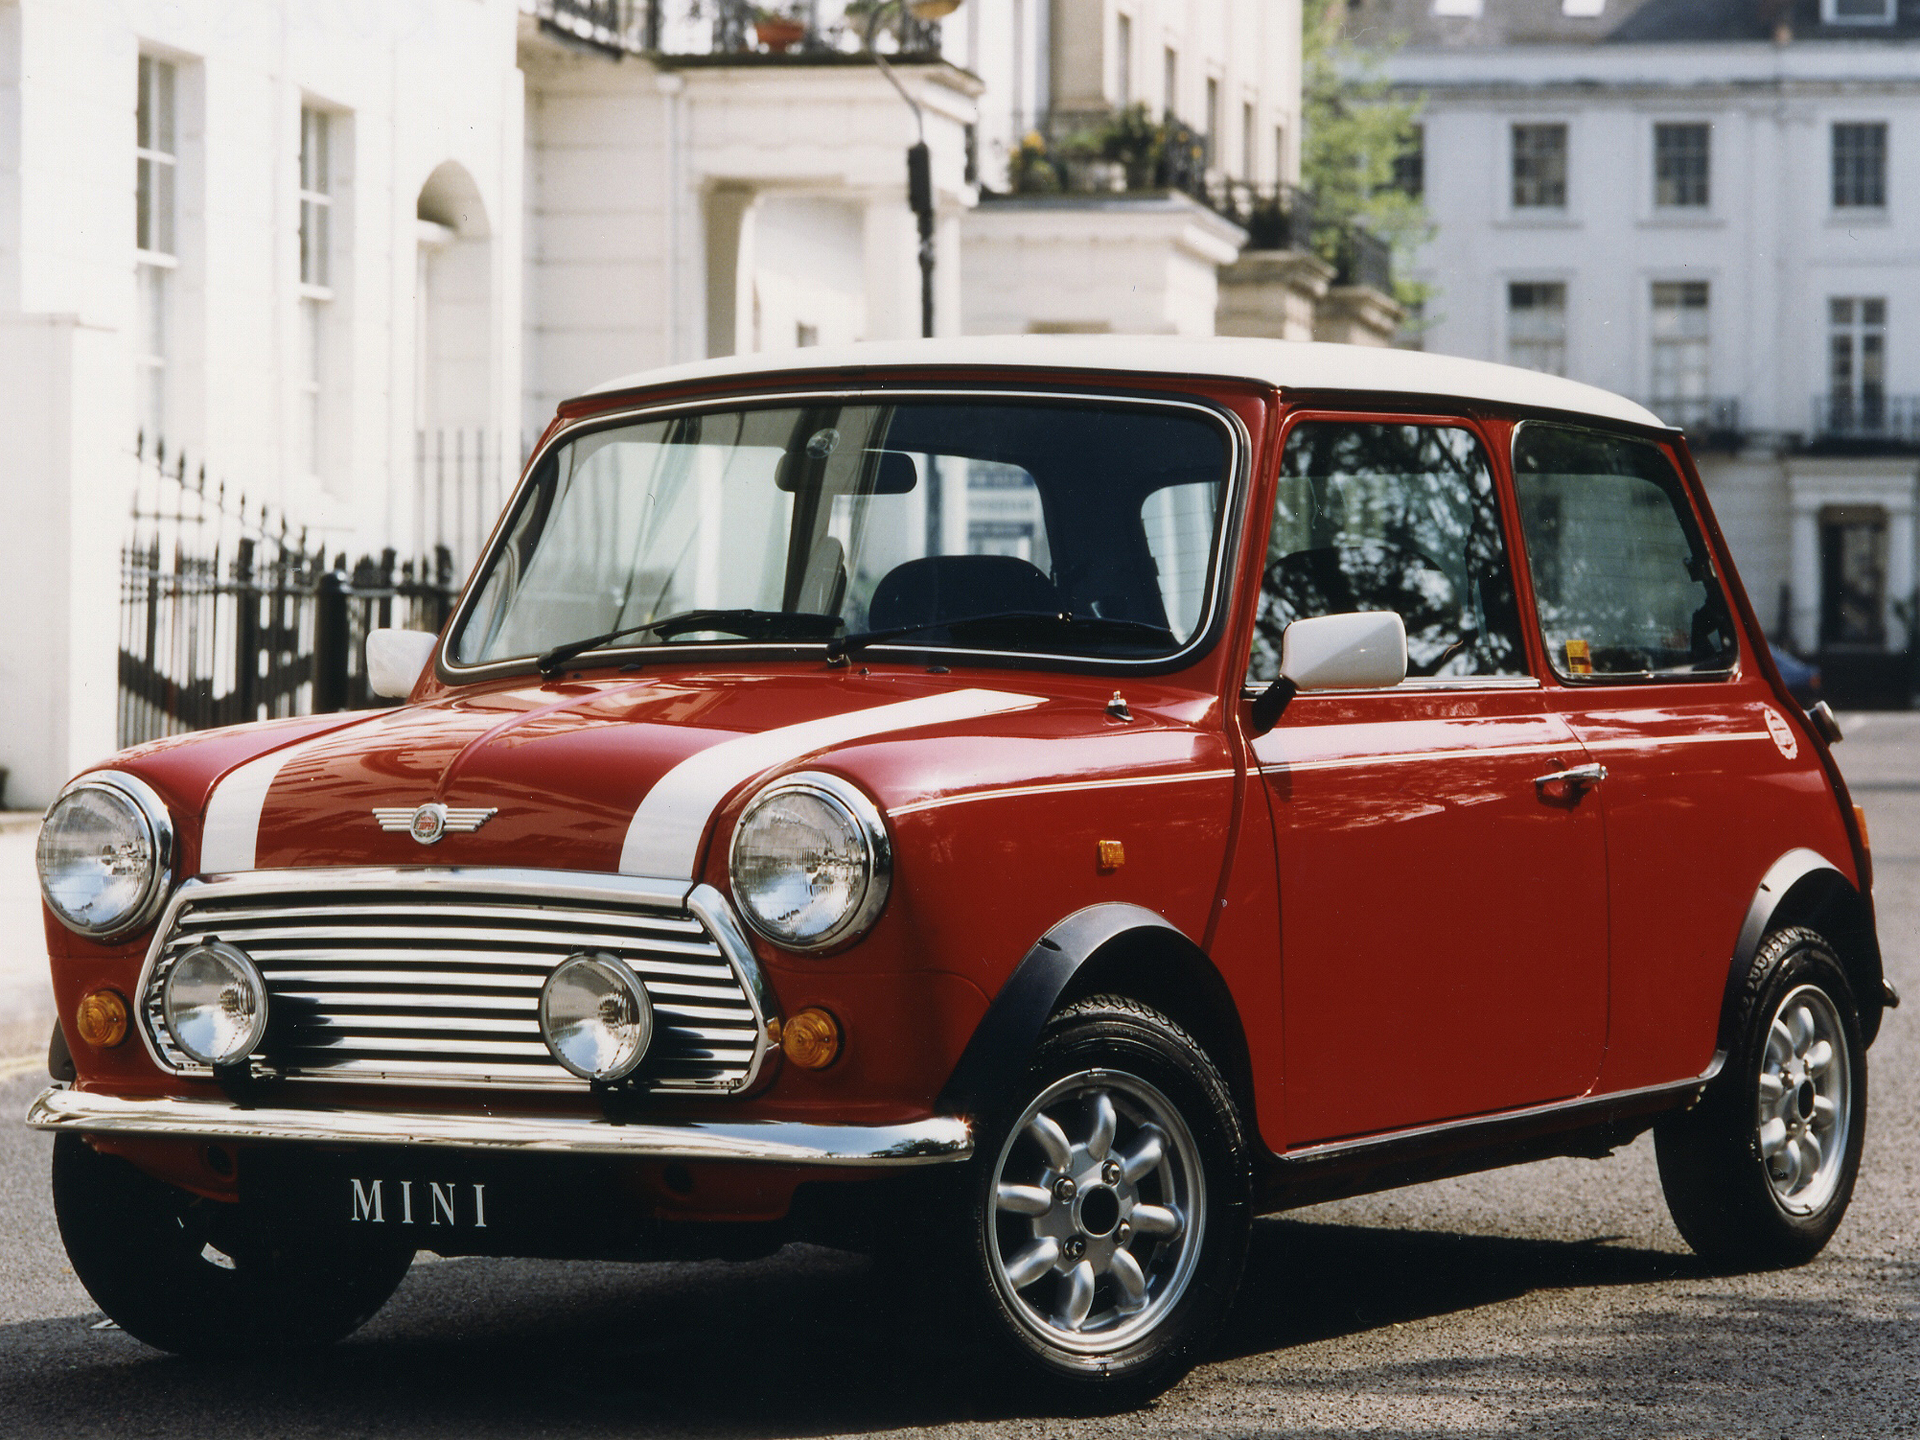 1990 Rover Mini Cooper Ado Wallpapers Hd Desktop And Mobile Backgrounds